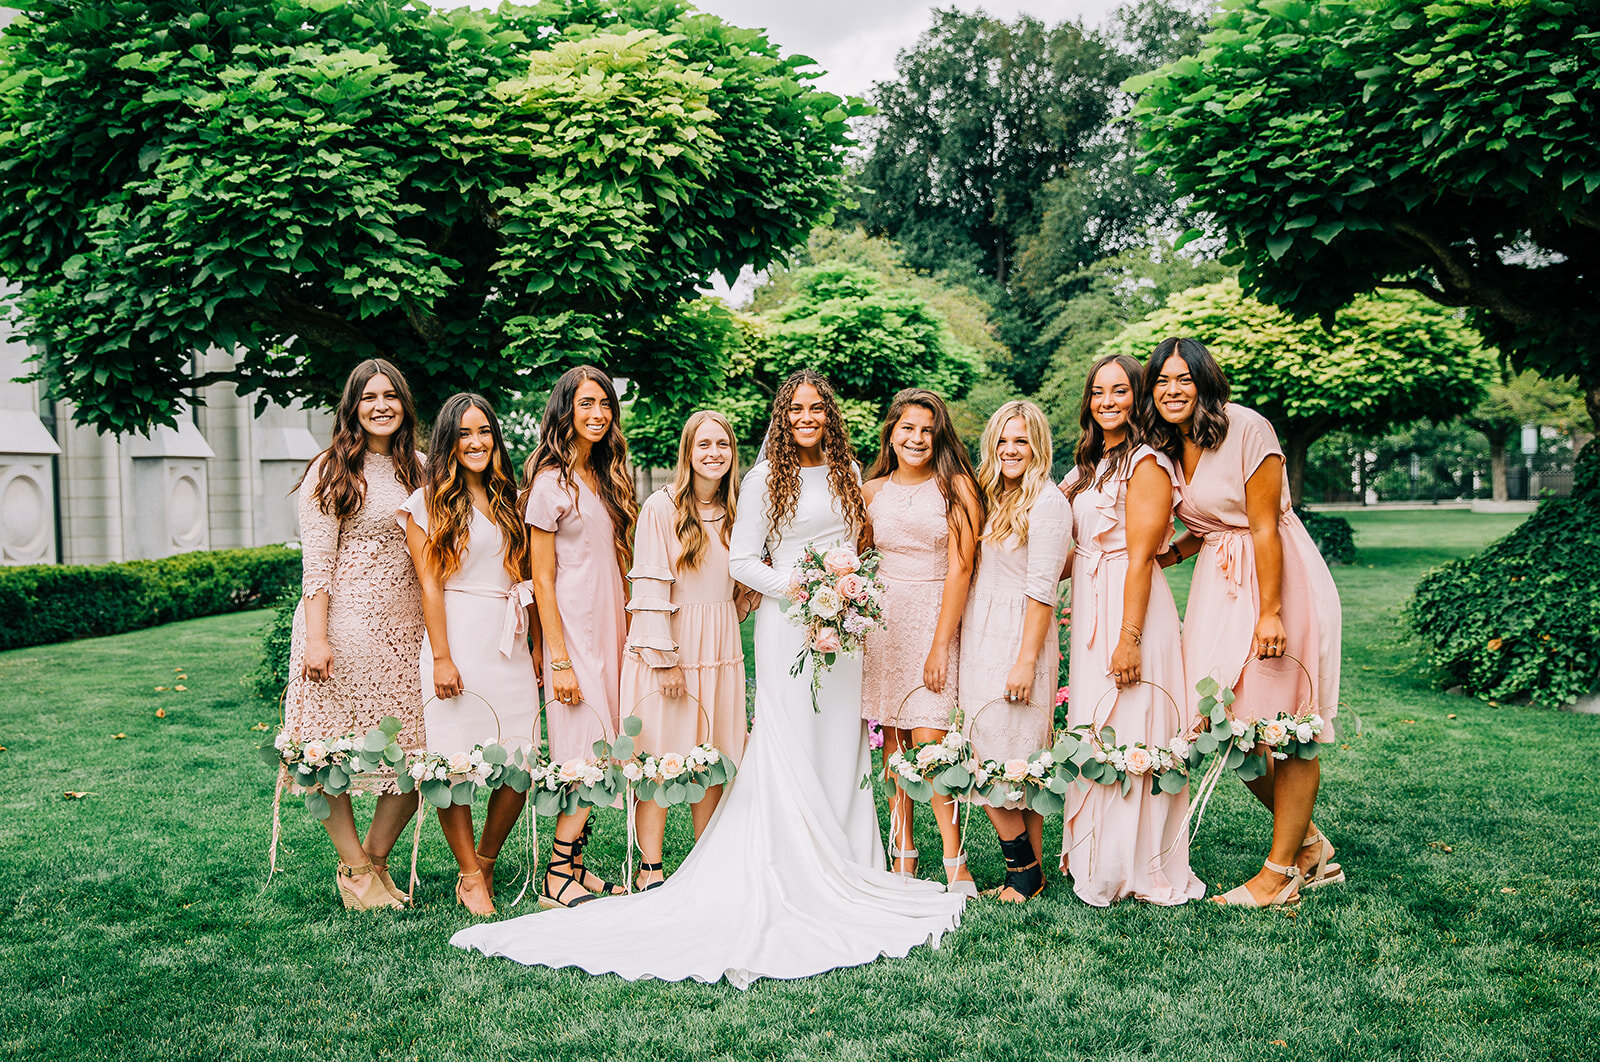  wedding party photo with just the girls bridesmaids with bride outside the temple square friends and family shots after sealing ceremony at salt lake city utah lds temple bride with her girls girl gang best friends blush bridesmaid dresses light pin